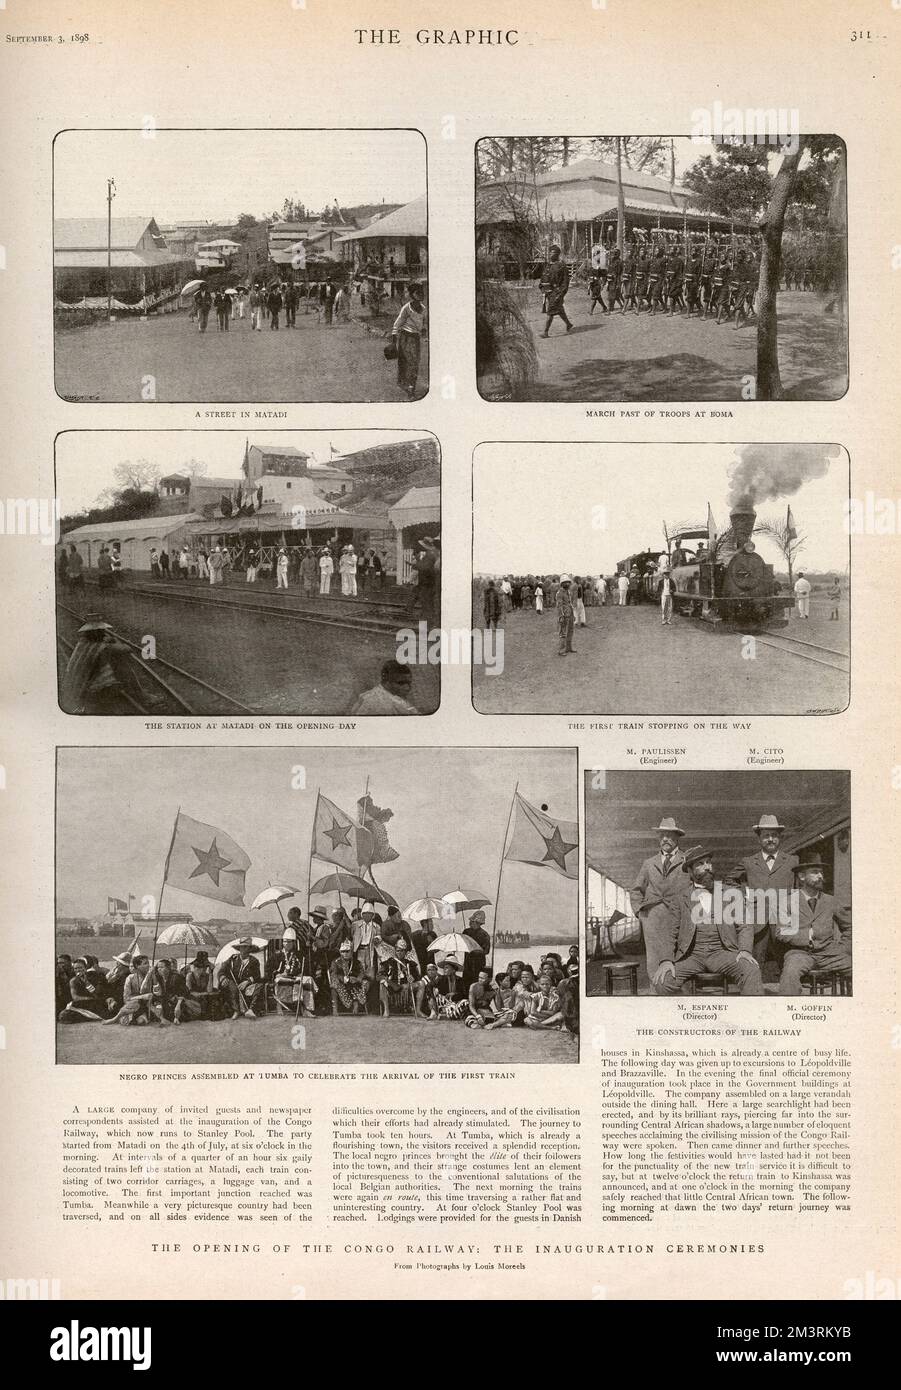 The opening of the Congo Railway: the inauguration ceremonies. A page from The Graphic, 3rd September 1898. Among the photographs on the page are those showing a march past of the troops at Boma, the first train stopping on the way, African princes assembled at Tumba to celebrate the arrival of the first train, and the constructors of the railway Messieurs Paulissen, Cito, Espanet and Goffin.  1898 Stock Photo